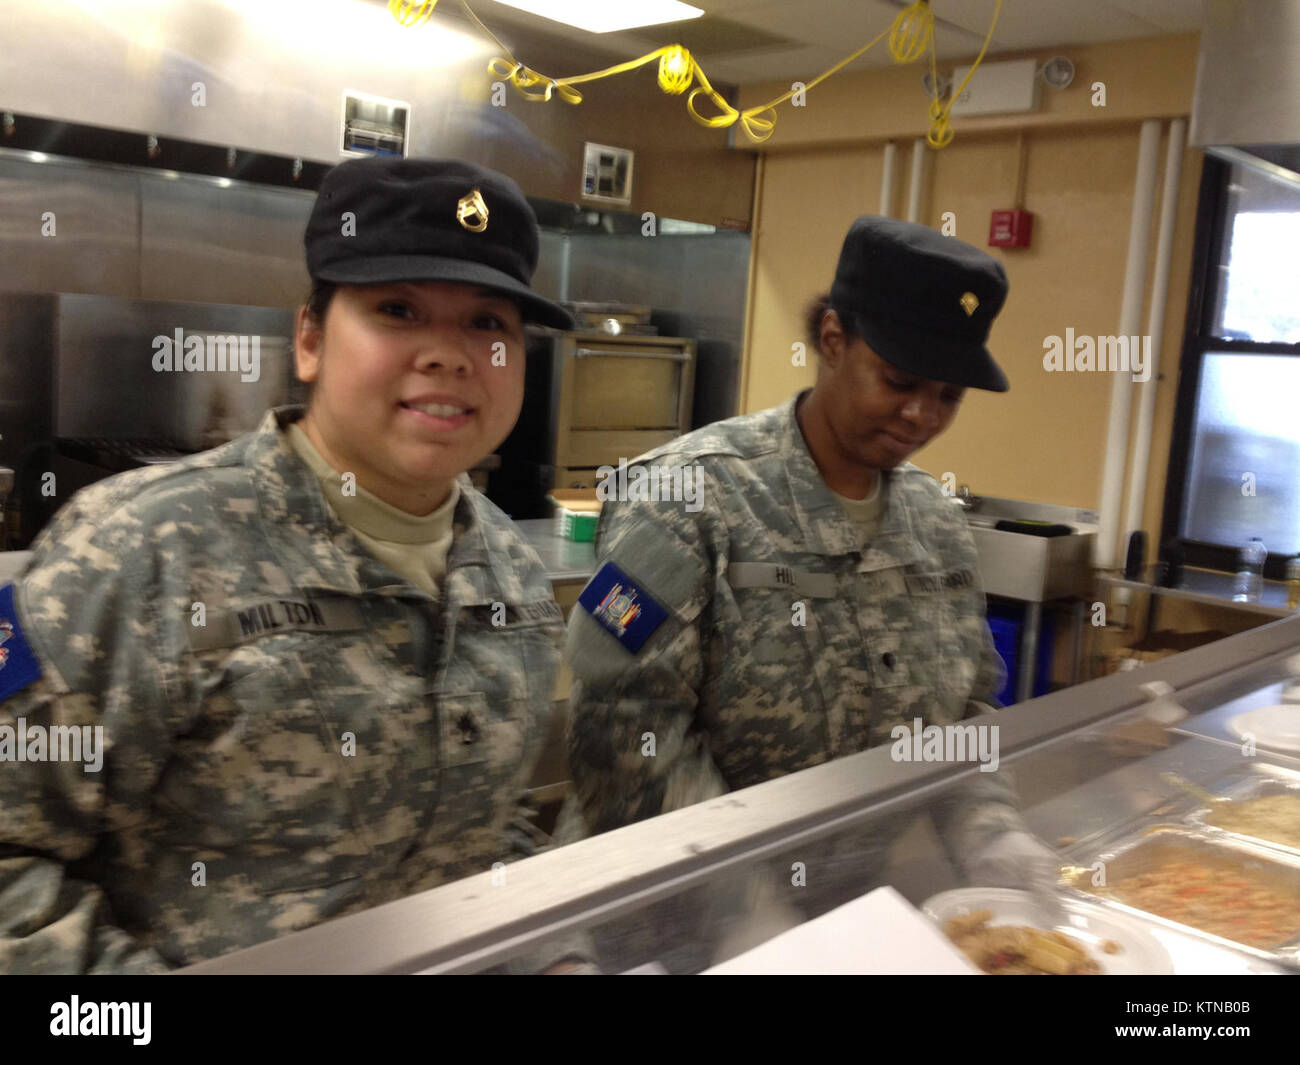 CAMP SMITH, NY - New York Guard Staff Sergeant Fiona Milton, HHC, from Elmhurst, and New York Guard Specialist Grace Hill, HHC, from Nyack, serve up chow on 7 Nov. The NY Guard has provided a team of mess hall personnel to augment the National Guard for JTF Sandy. (Photo by Sergeant First Class Dave Konig, NY Guard) Stock Photo